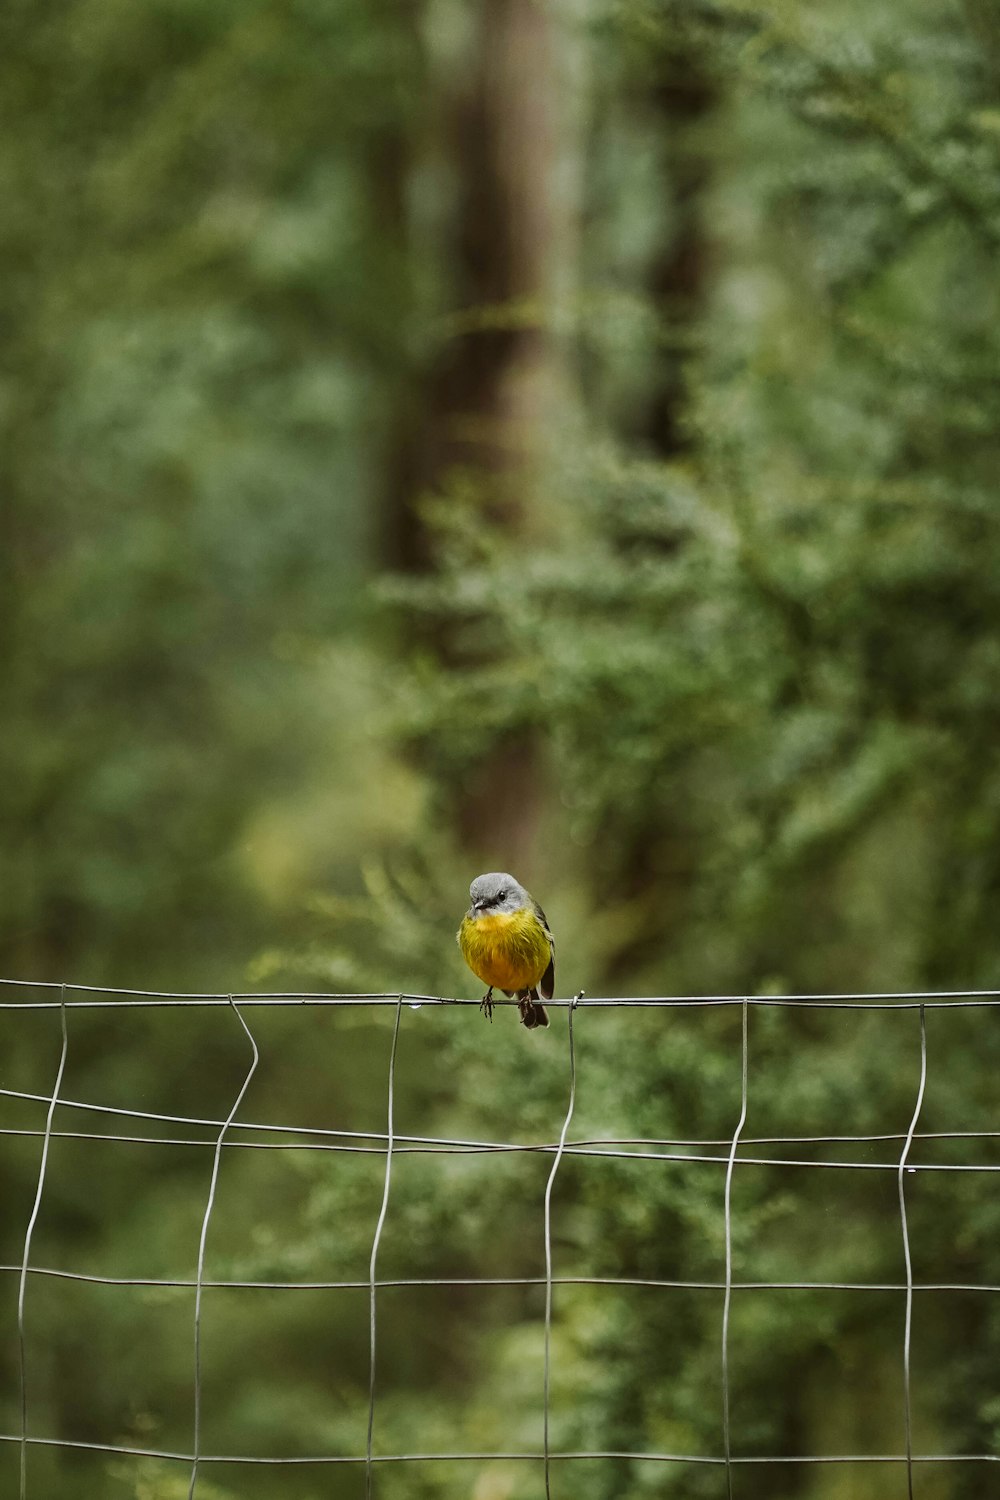 a small yellow bird perched on a wire